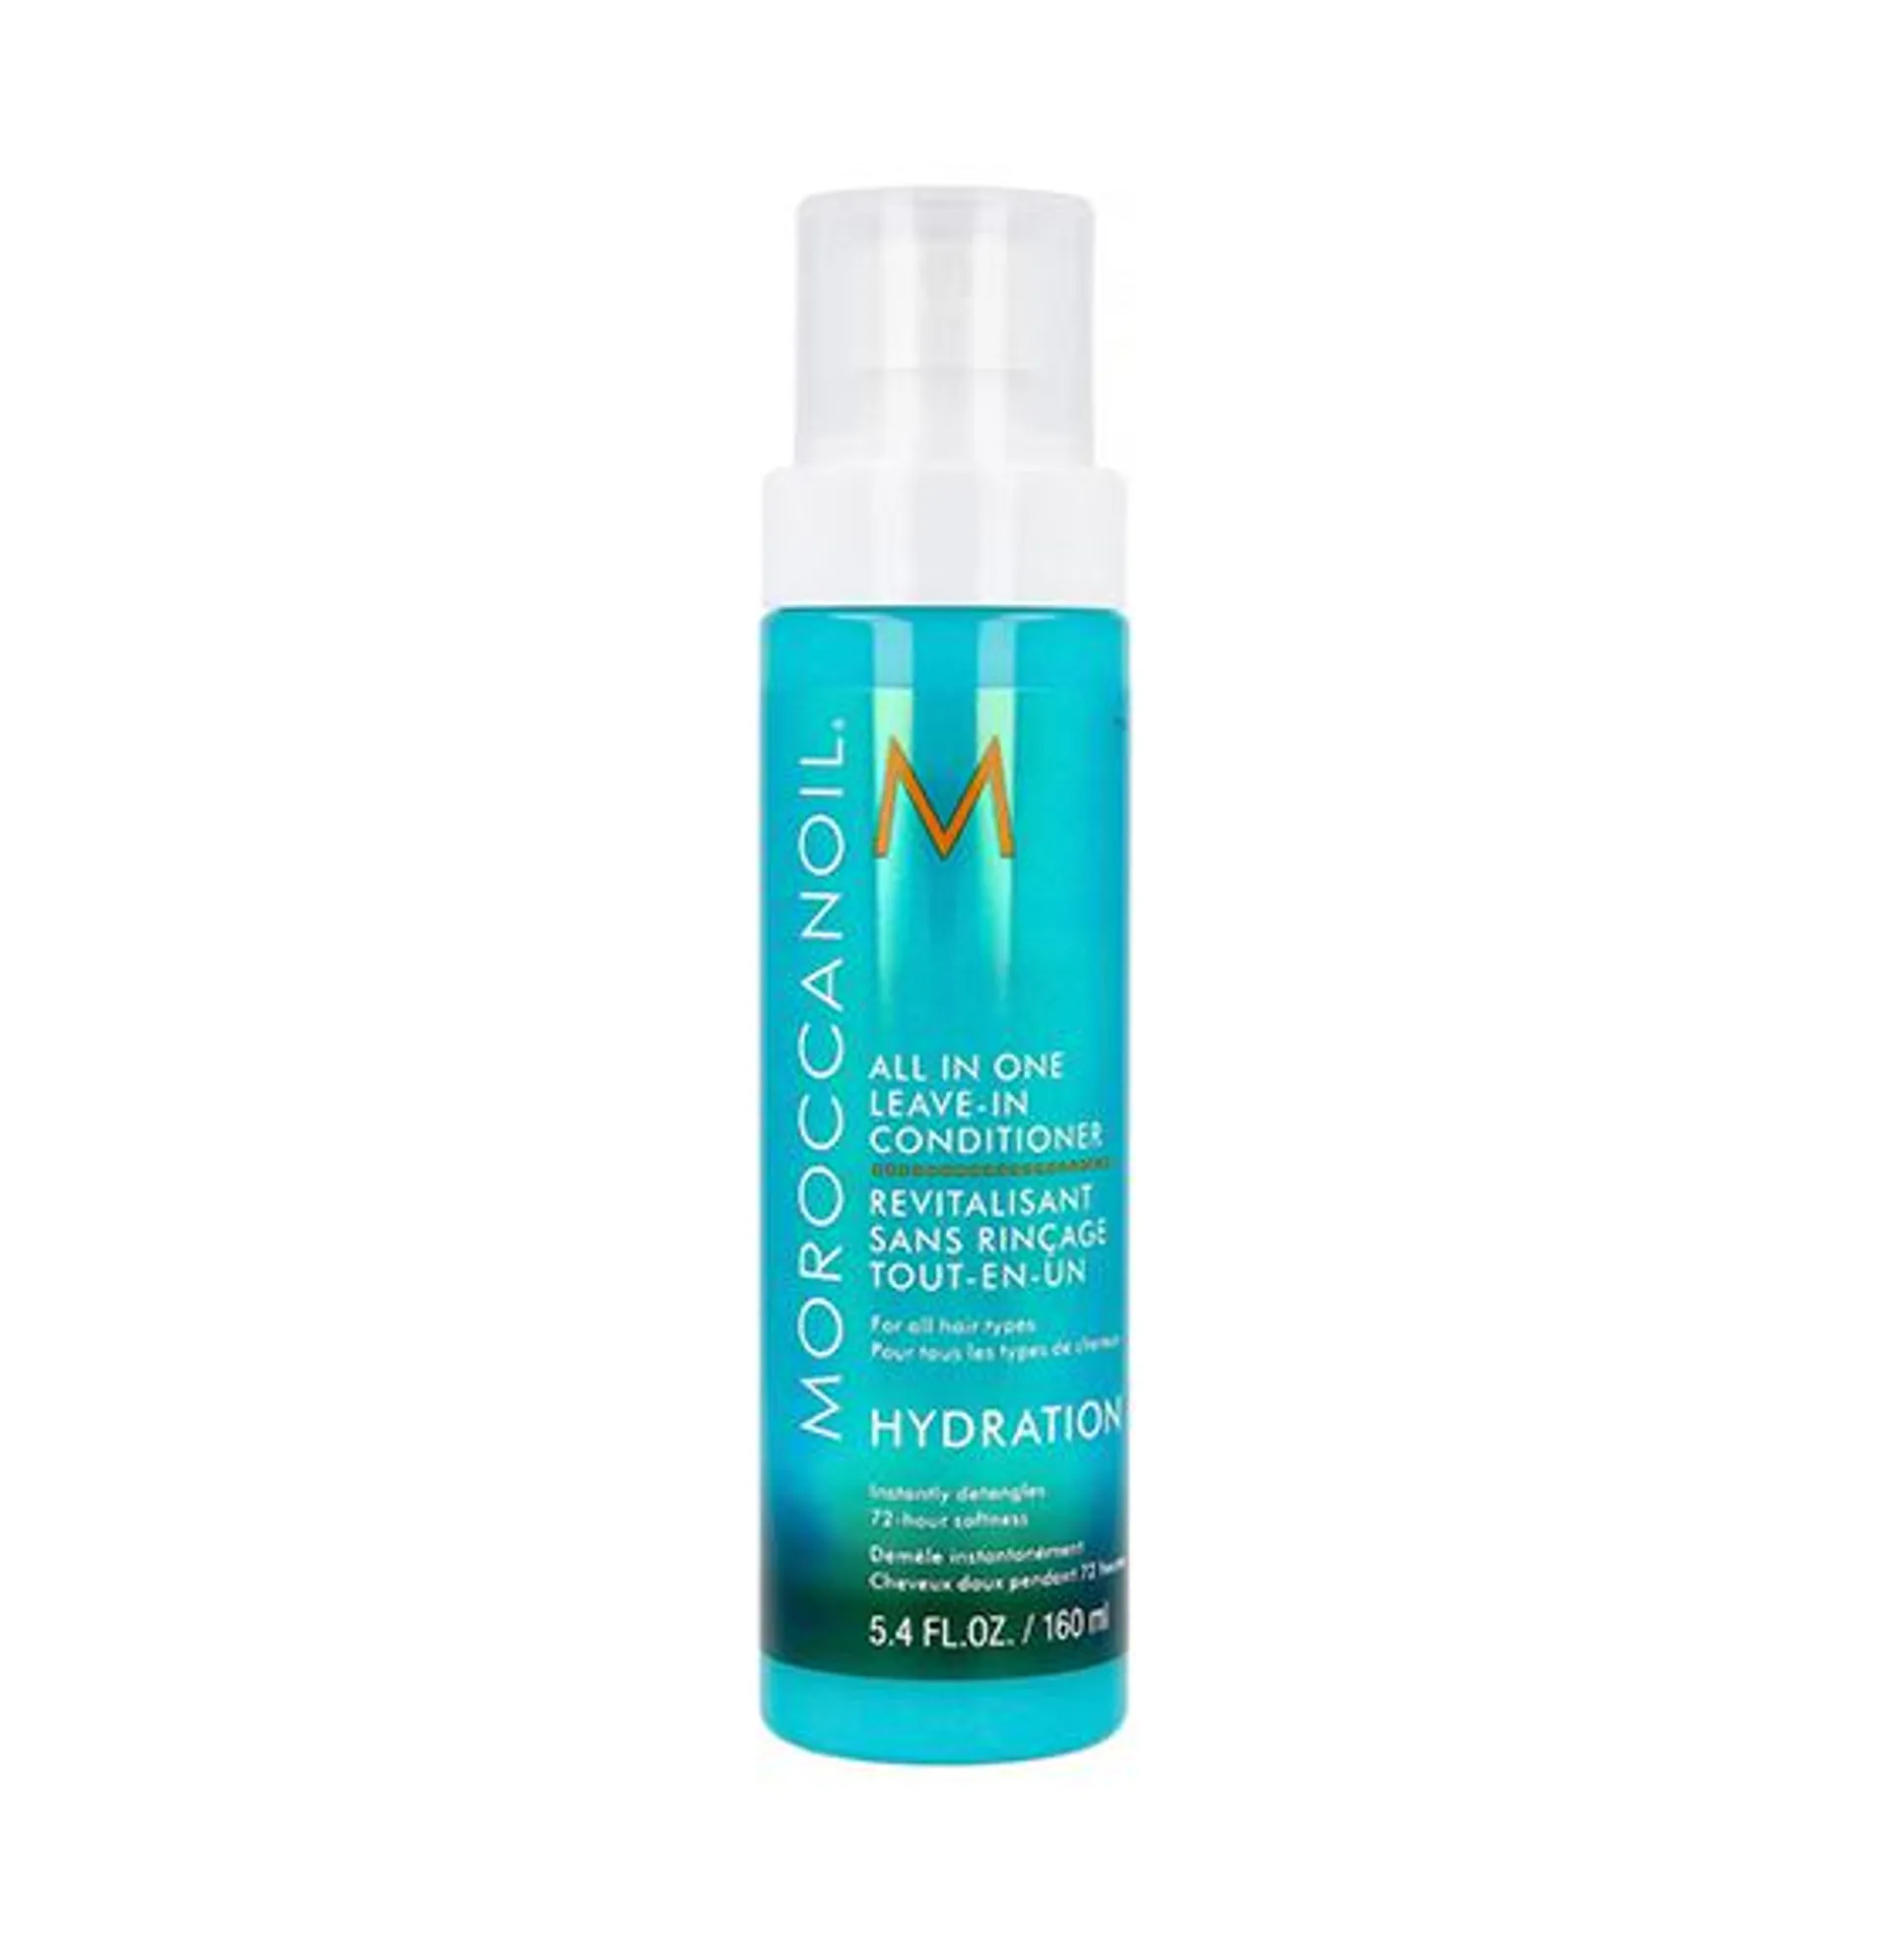 Moroccanoil All in one leave-in conditioner